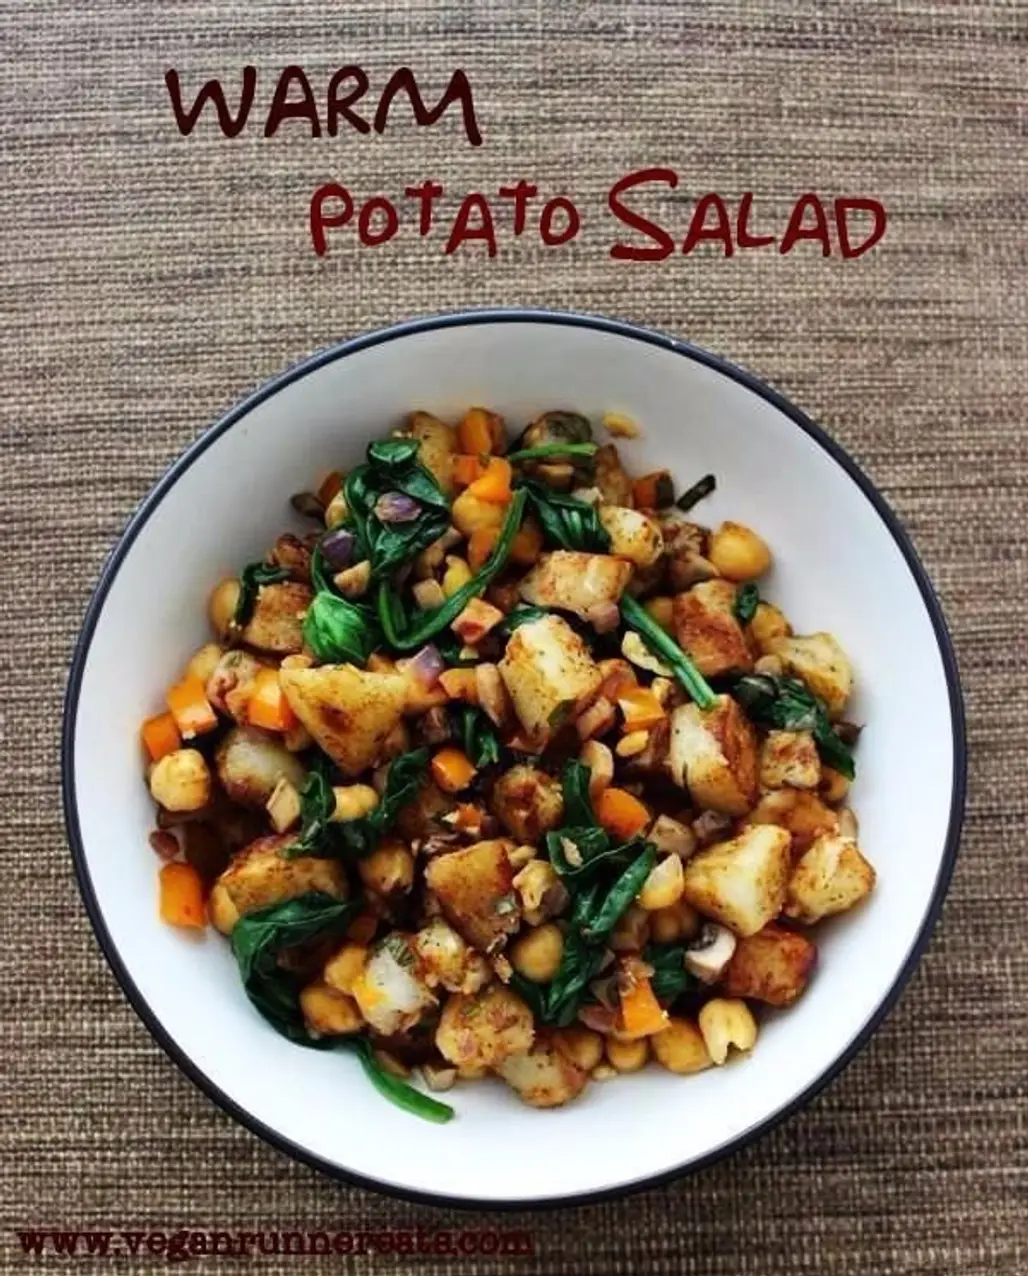 Warm Potato Salad with Spinach and Chickpeas